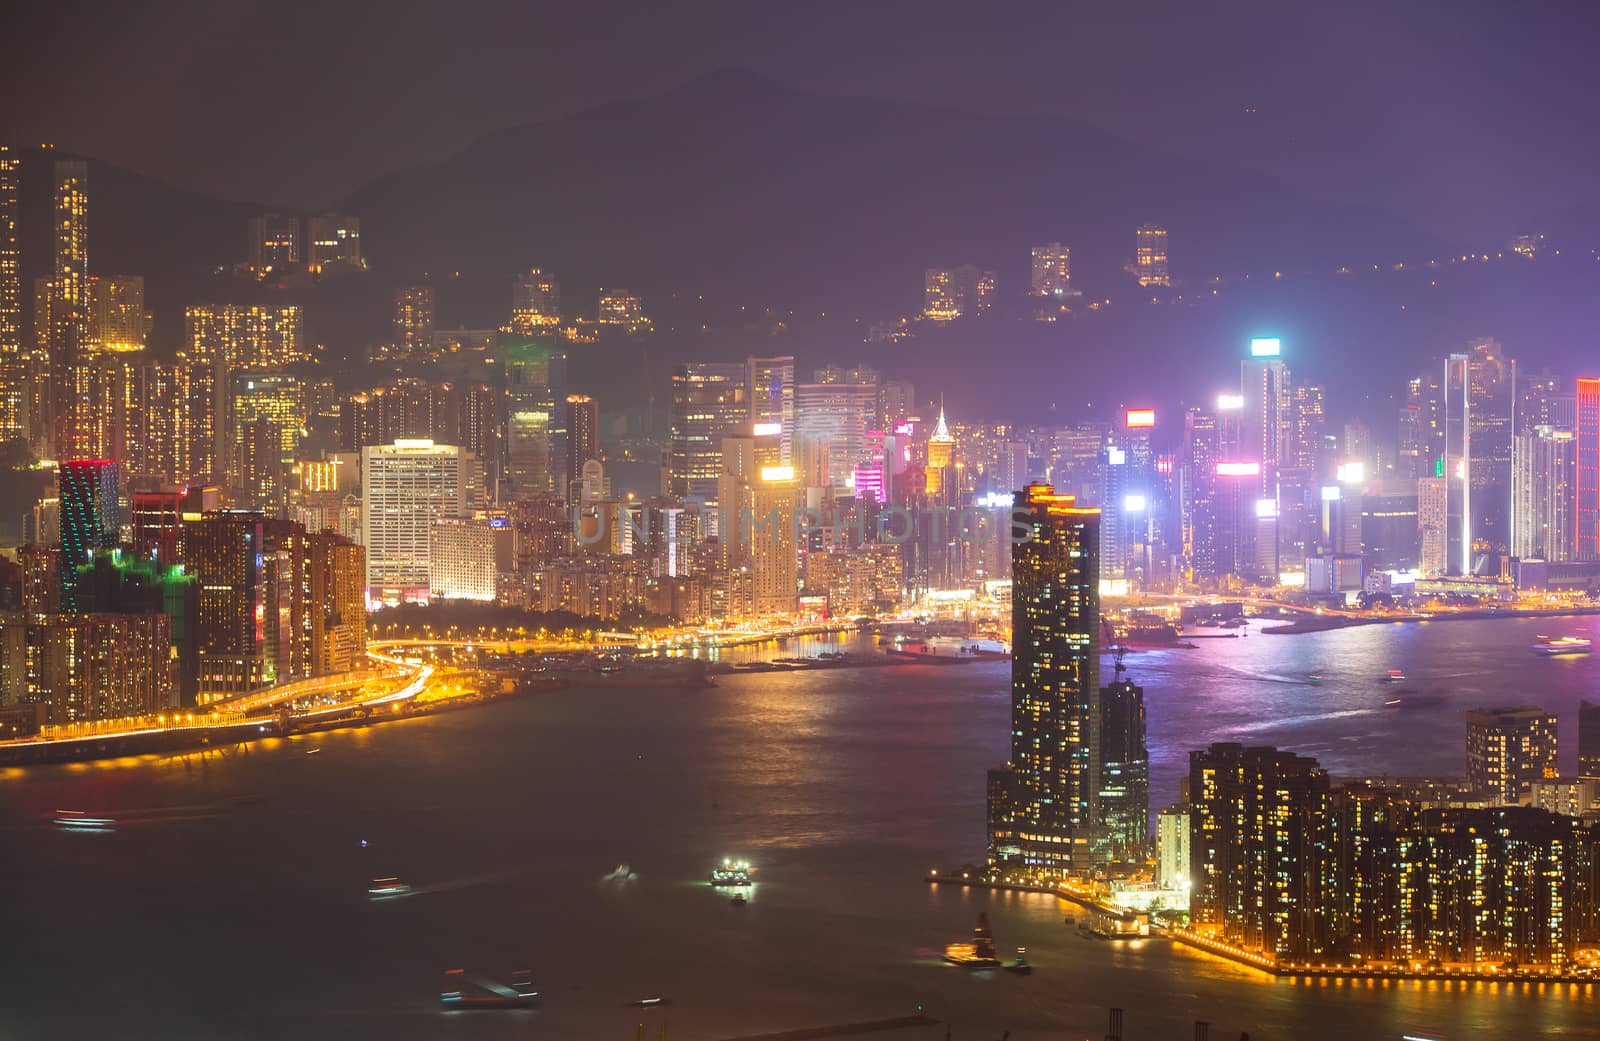 Hong Kong Skyline Kowloon from Fei Ngo Shan hill sunset by freedomnaruk